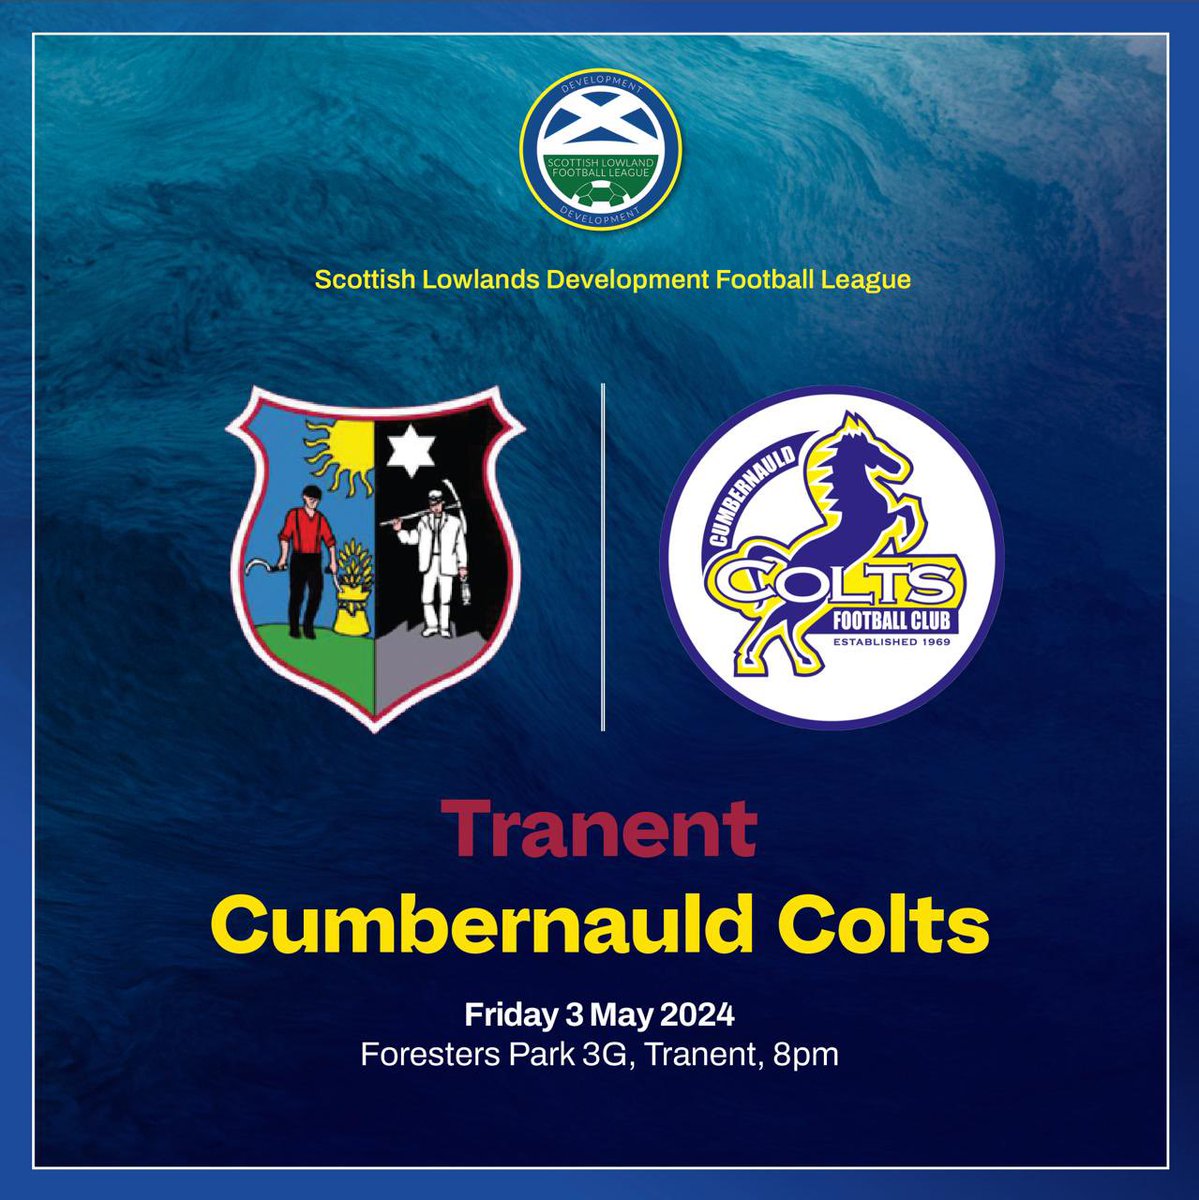 This Friday, we welcome Cumbernauld Colts back to Foresters 3G for a league game.

🆚 Cumbernauld Colts
🏆 League
🗓️ Friday 3rd May
🏟️ Foresters 3G 
⏰ 20.00 KO 

⚠️ - All supporters are politely requested to stand out with the 3G fence, as per SLDFL regulations.

#lieforrit